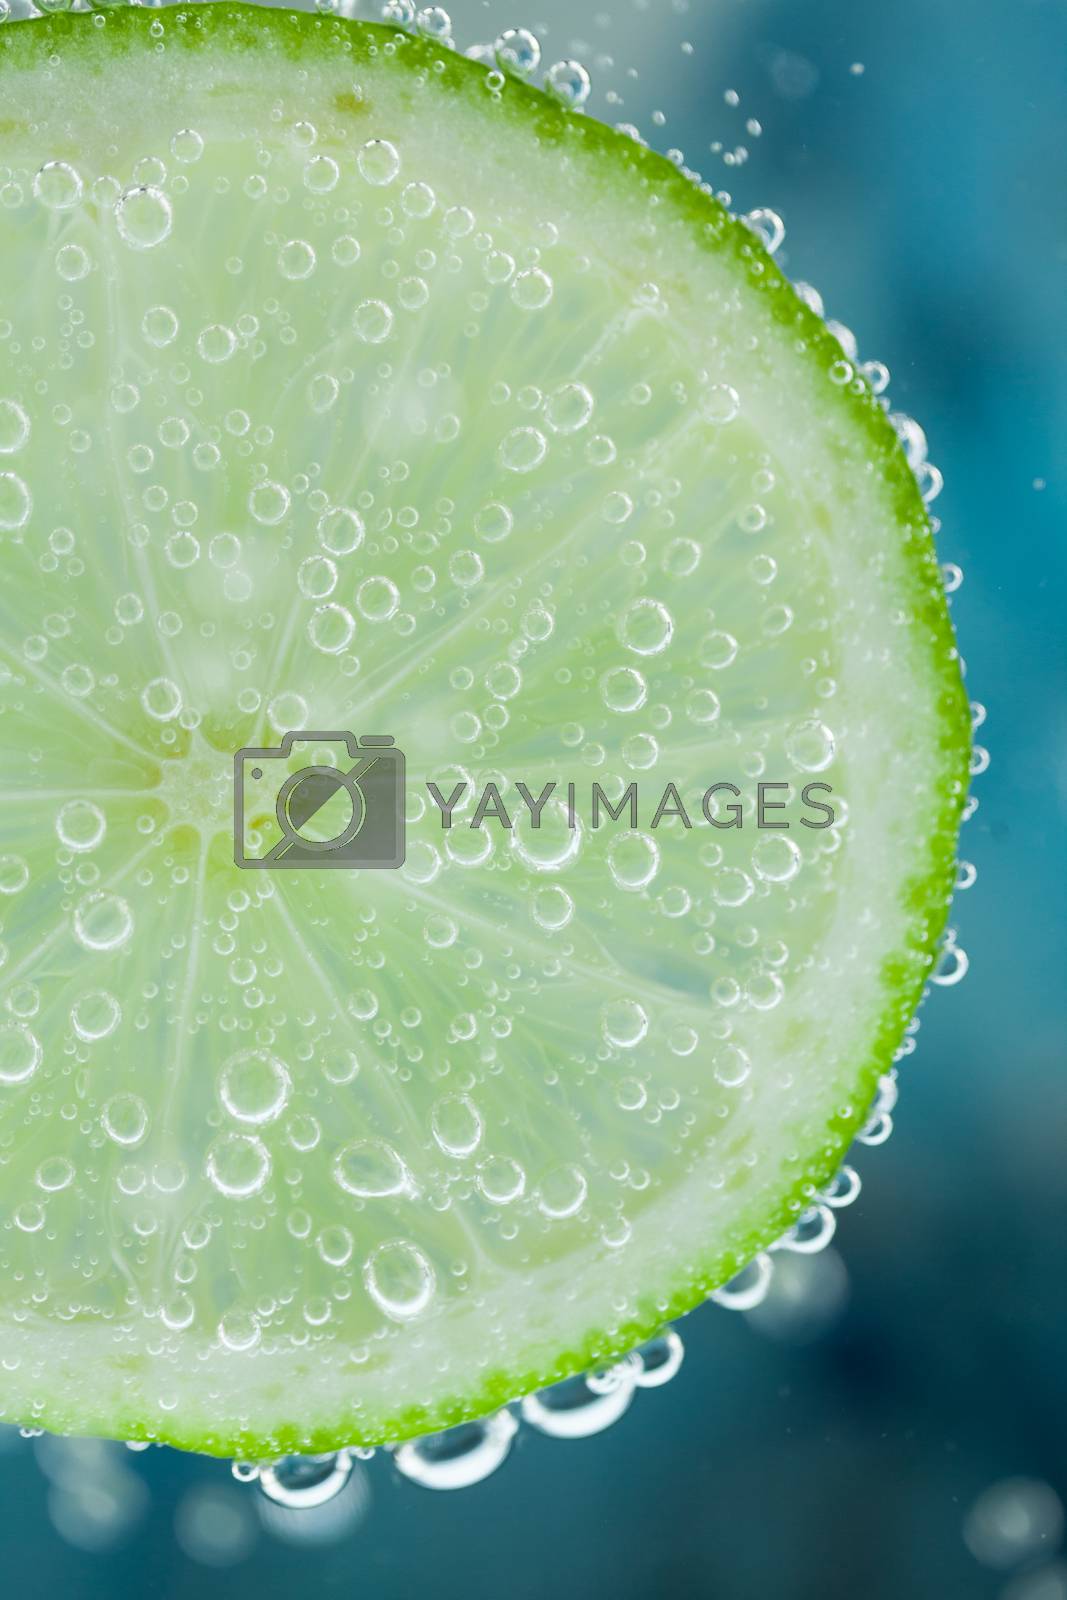 Royalty free image of Lime refresher concept by juniart